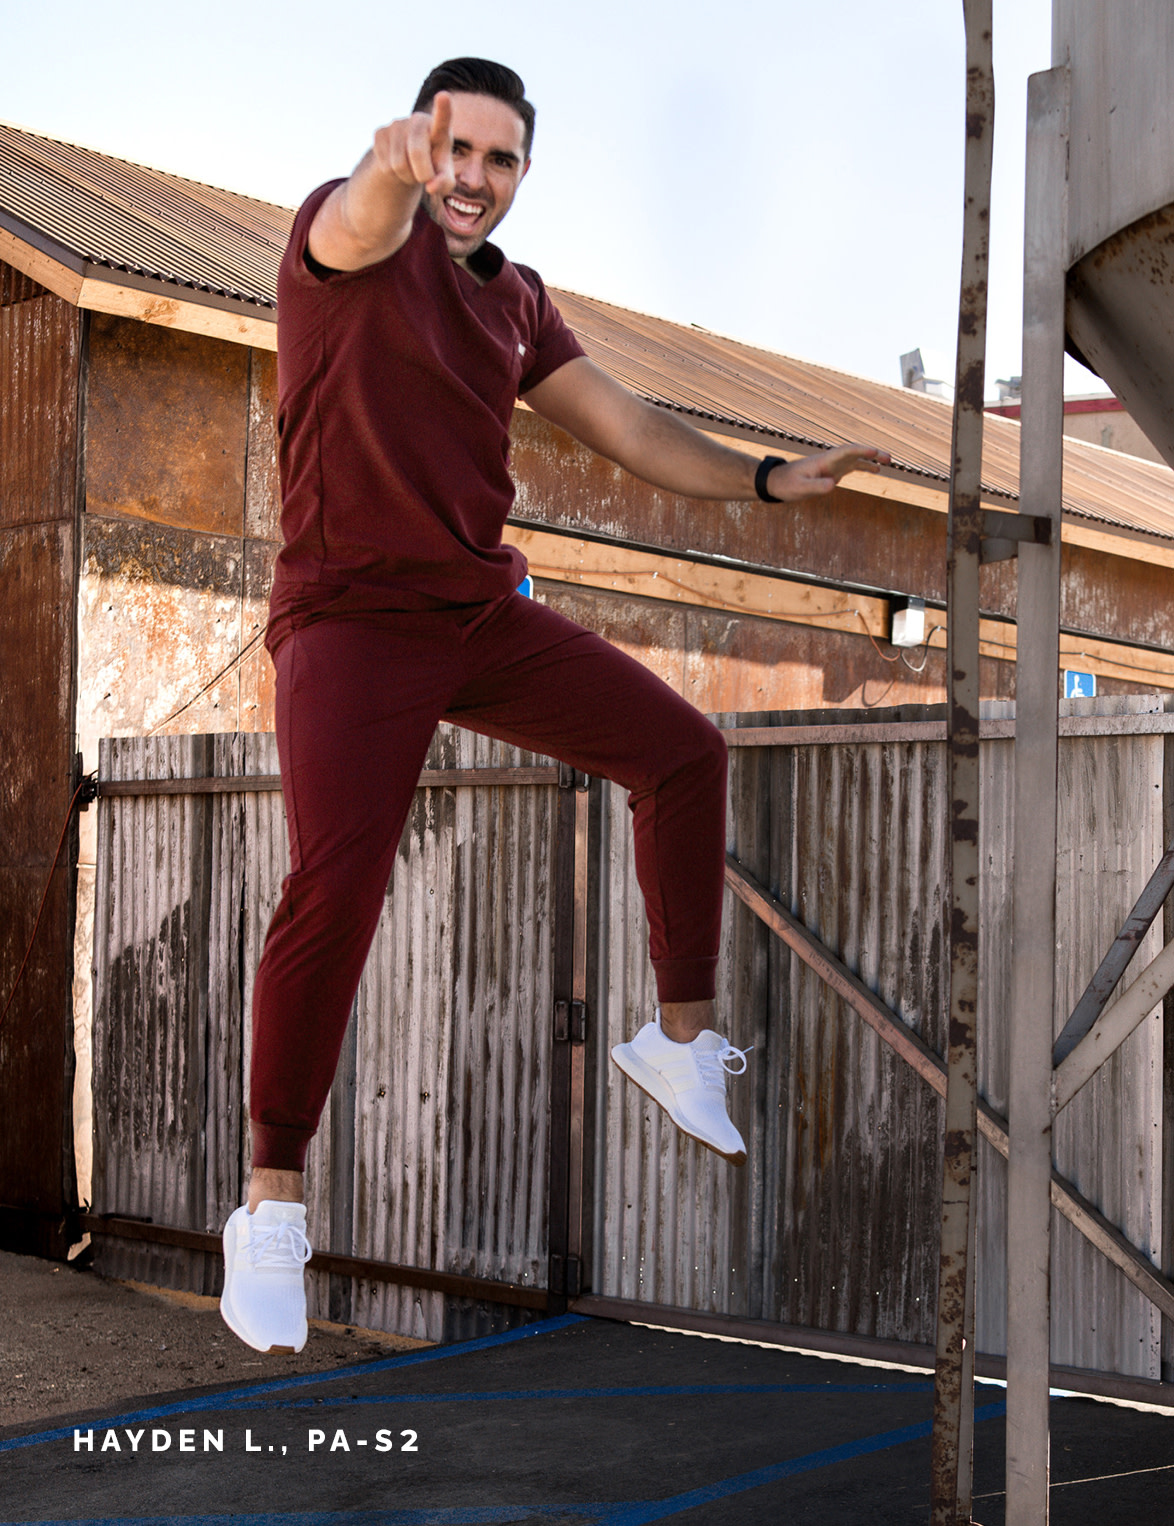 TANSEN™ JOGGER — The scrub pant that goes from work to workout to play, every single day. Athletic, lightweight and breathable for 24/7 style and function.